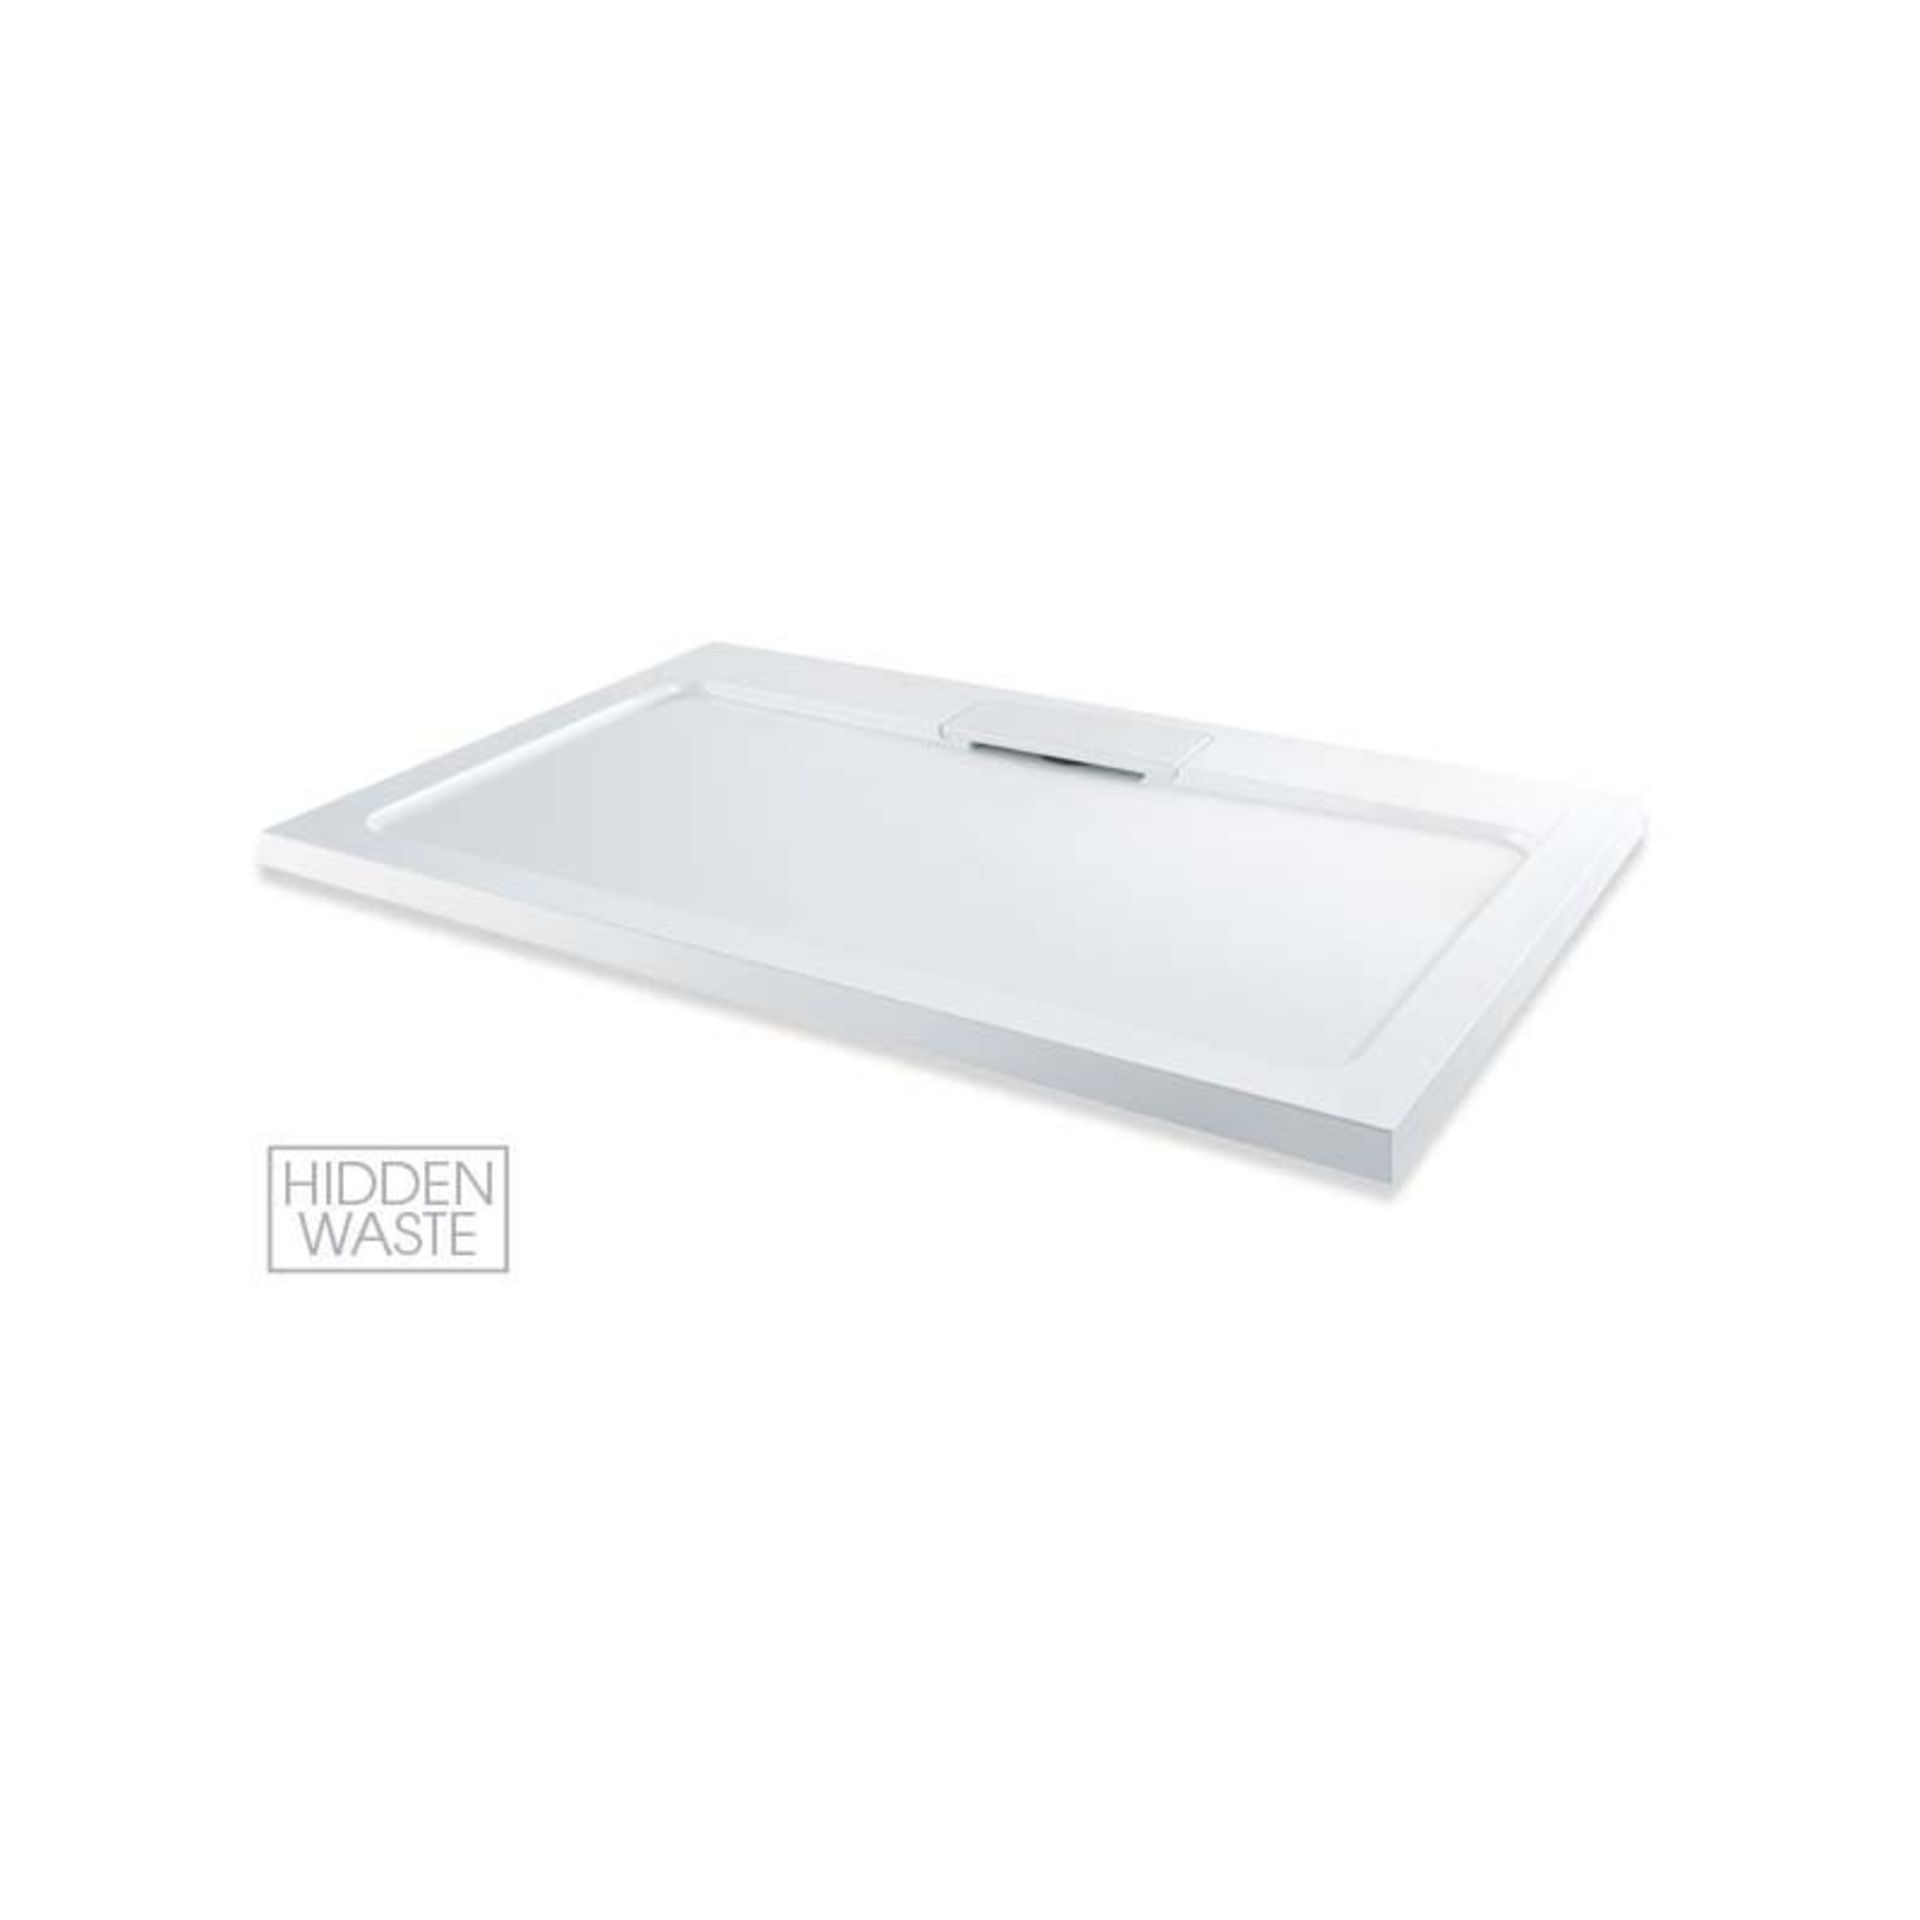 New 1200x800mm Luxe Ultra Slim Stone Shower Tray Hidden Waste - White. Manufactured In The UK ...